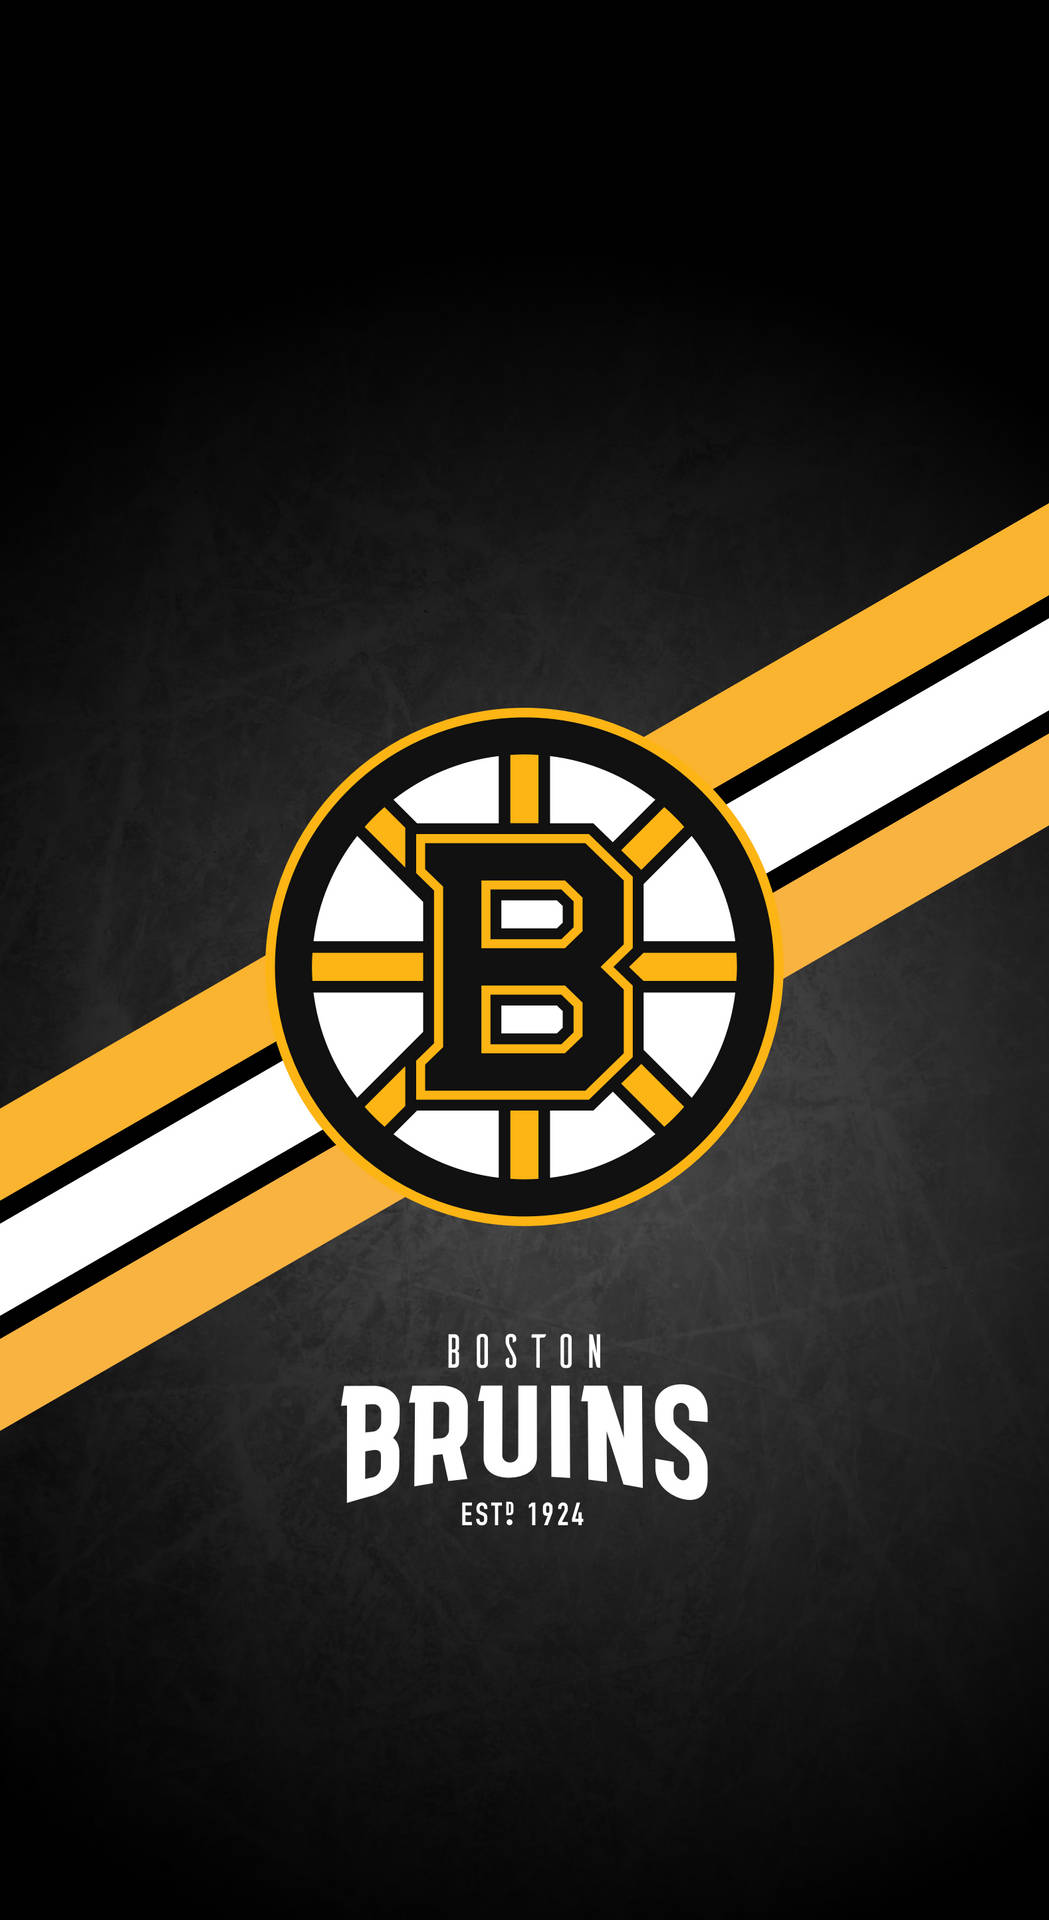 Boston Bruins wallpapers - wallpapers for din computer Wallpaper